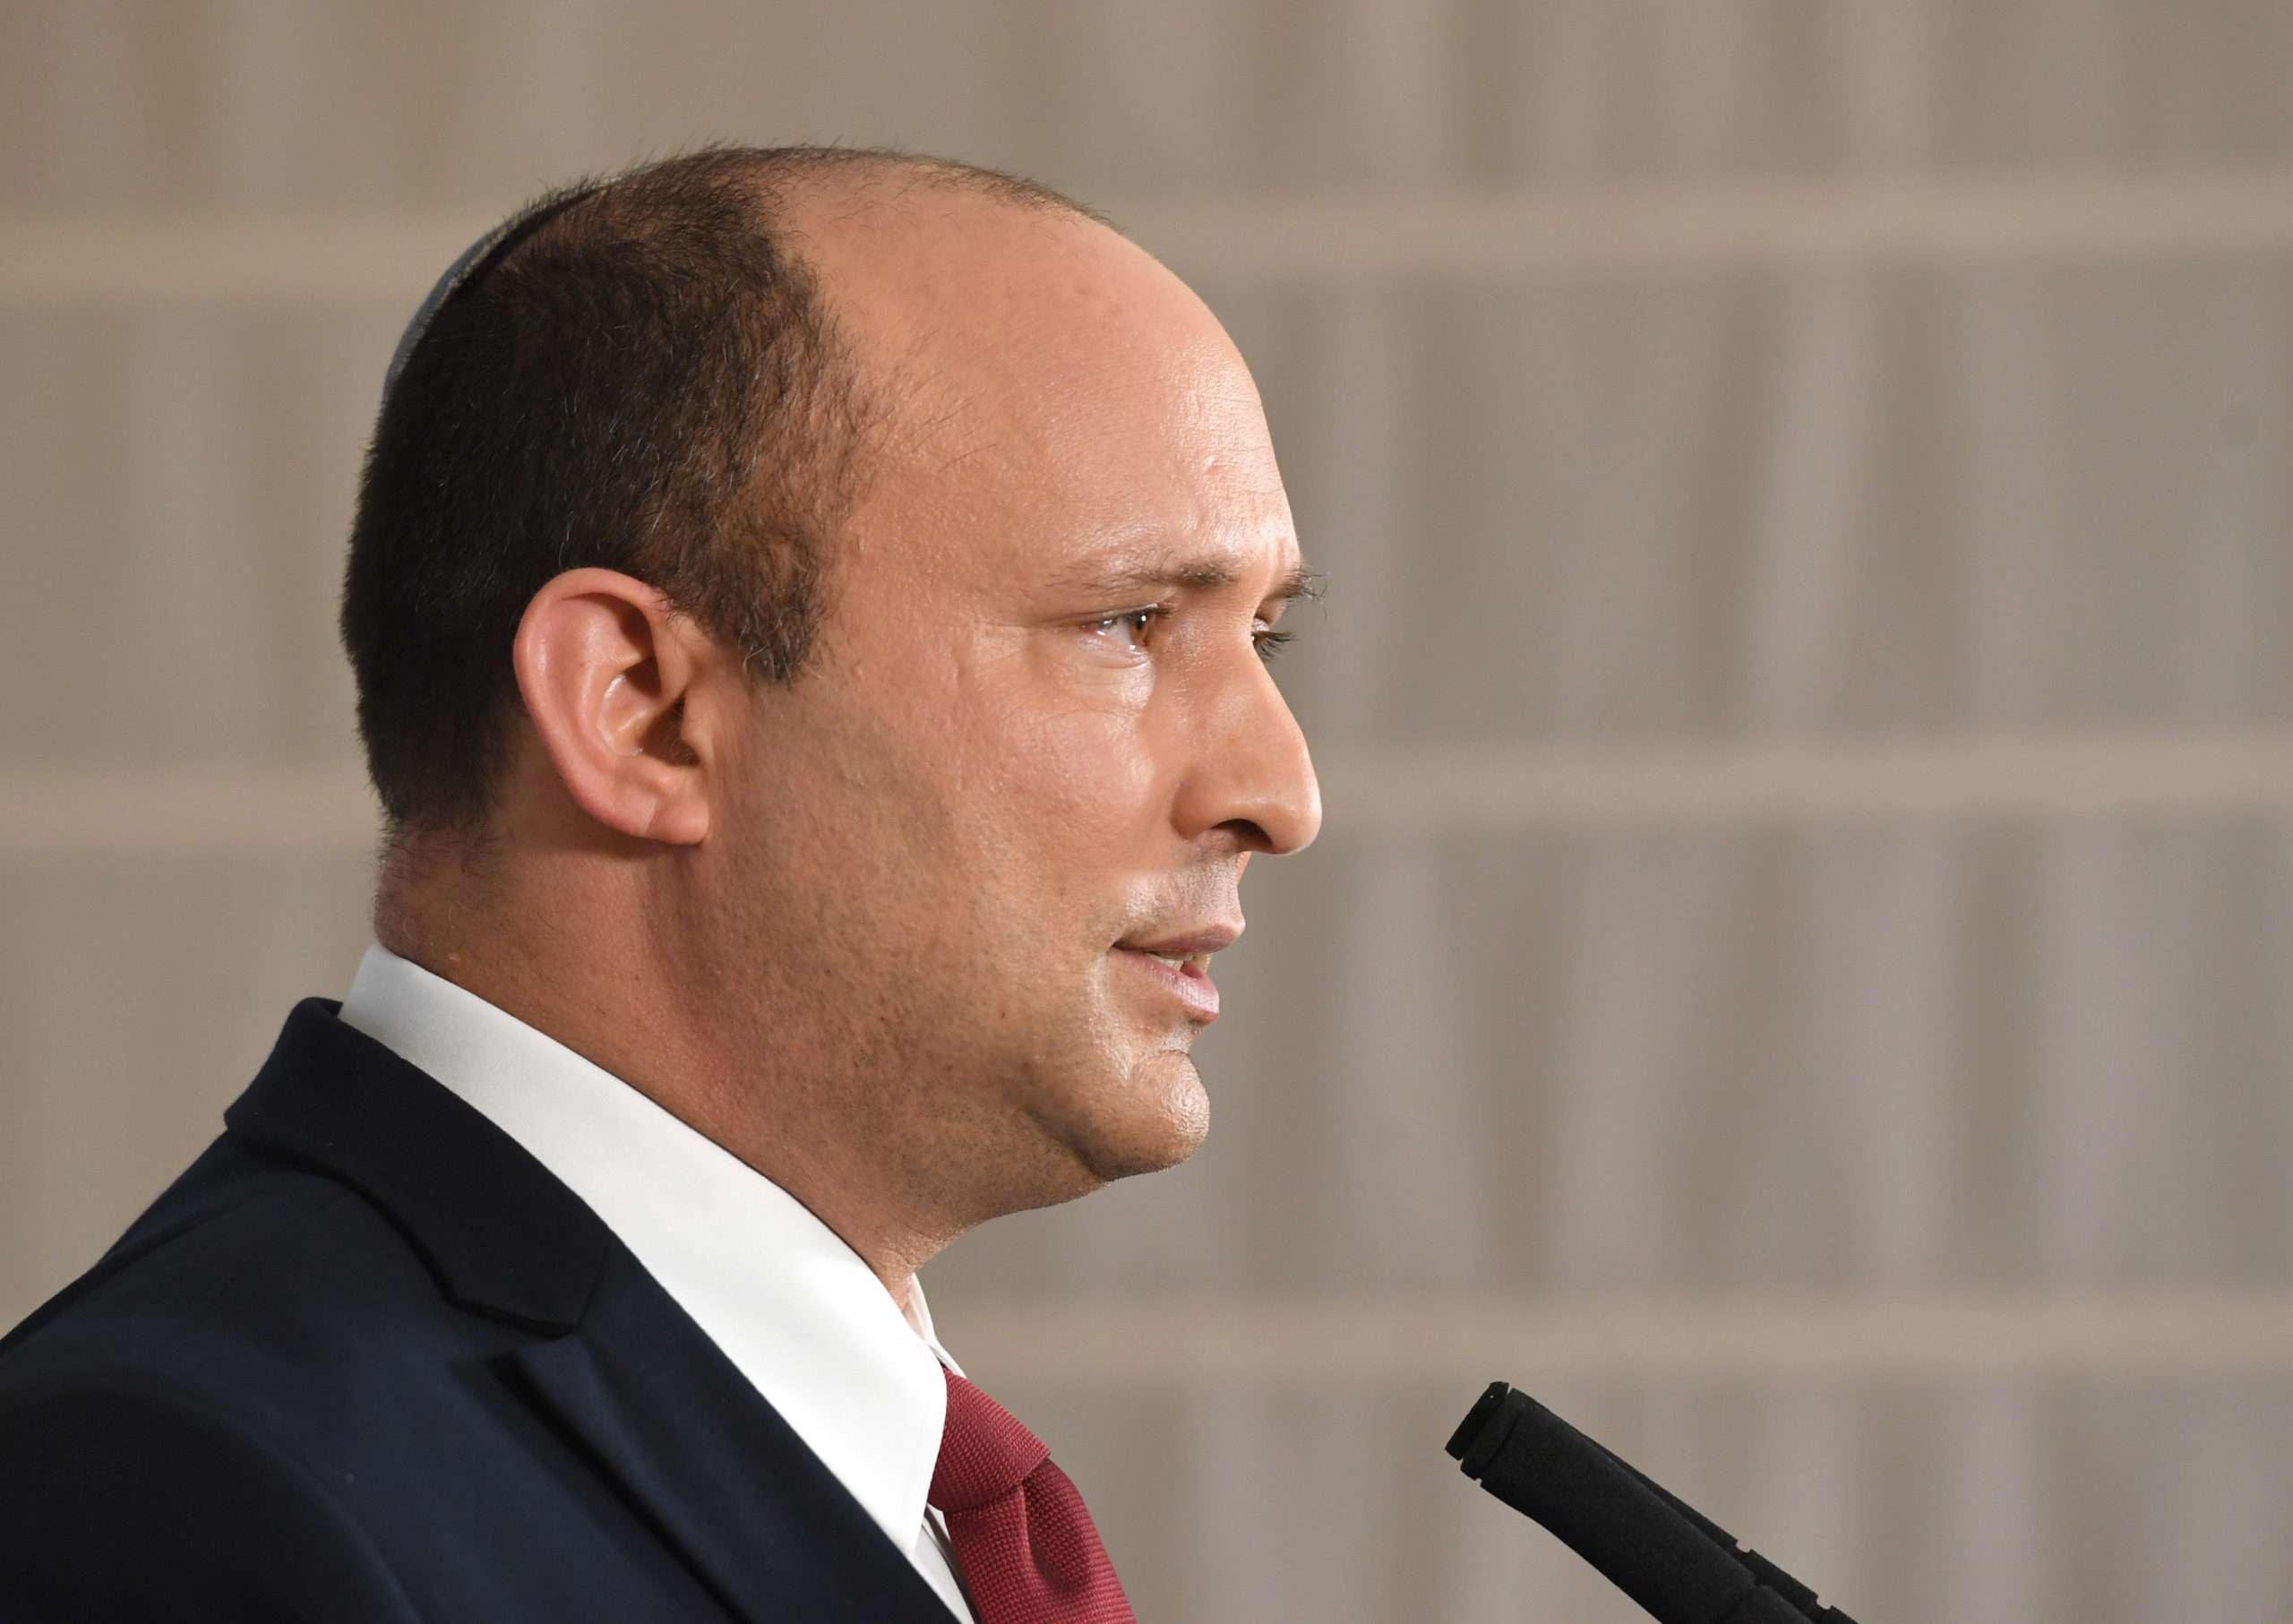 Remarks by Israel Prime Minister Naftali Bennett to the INSS 15th Annual International Conference